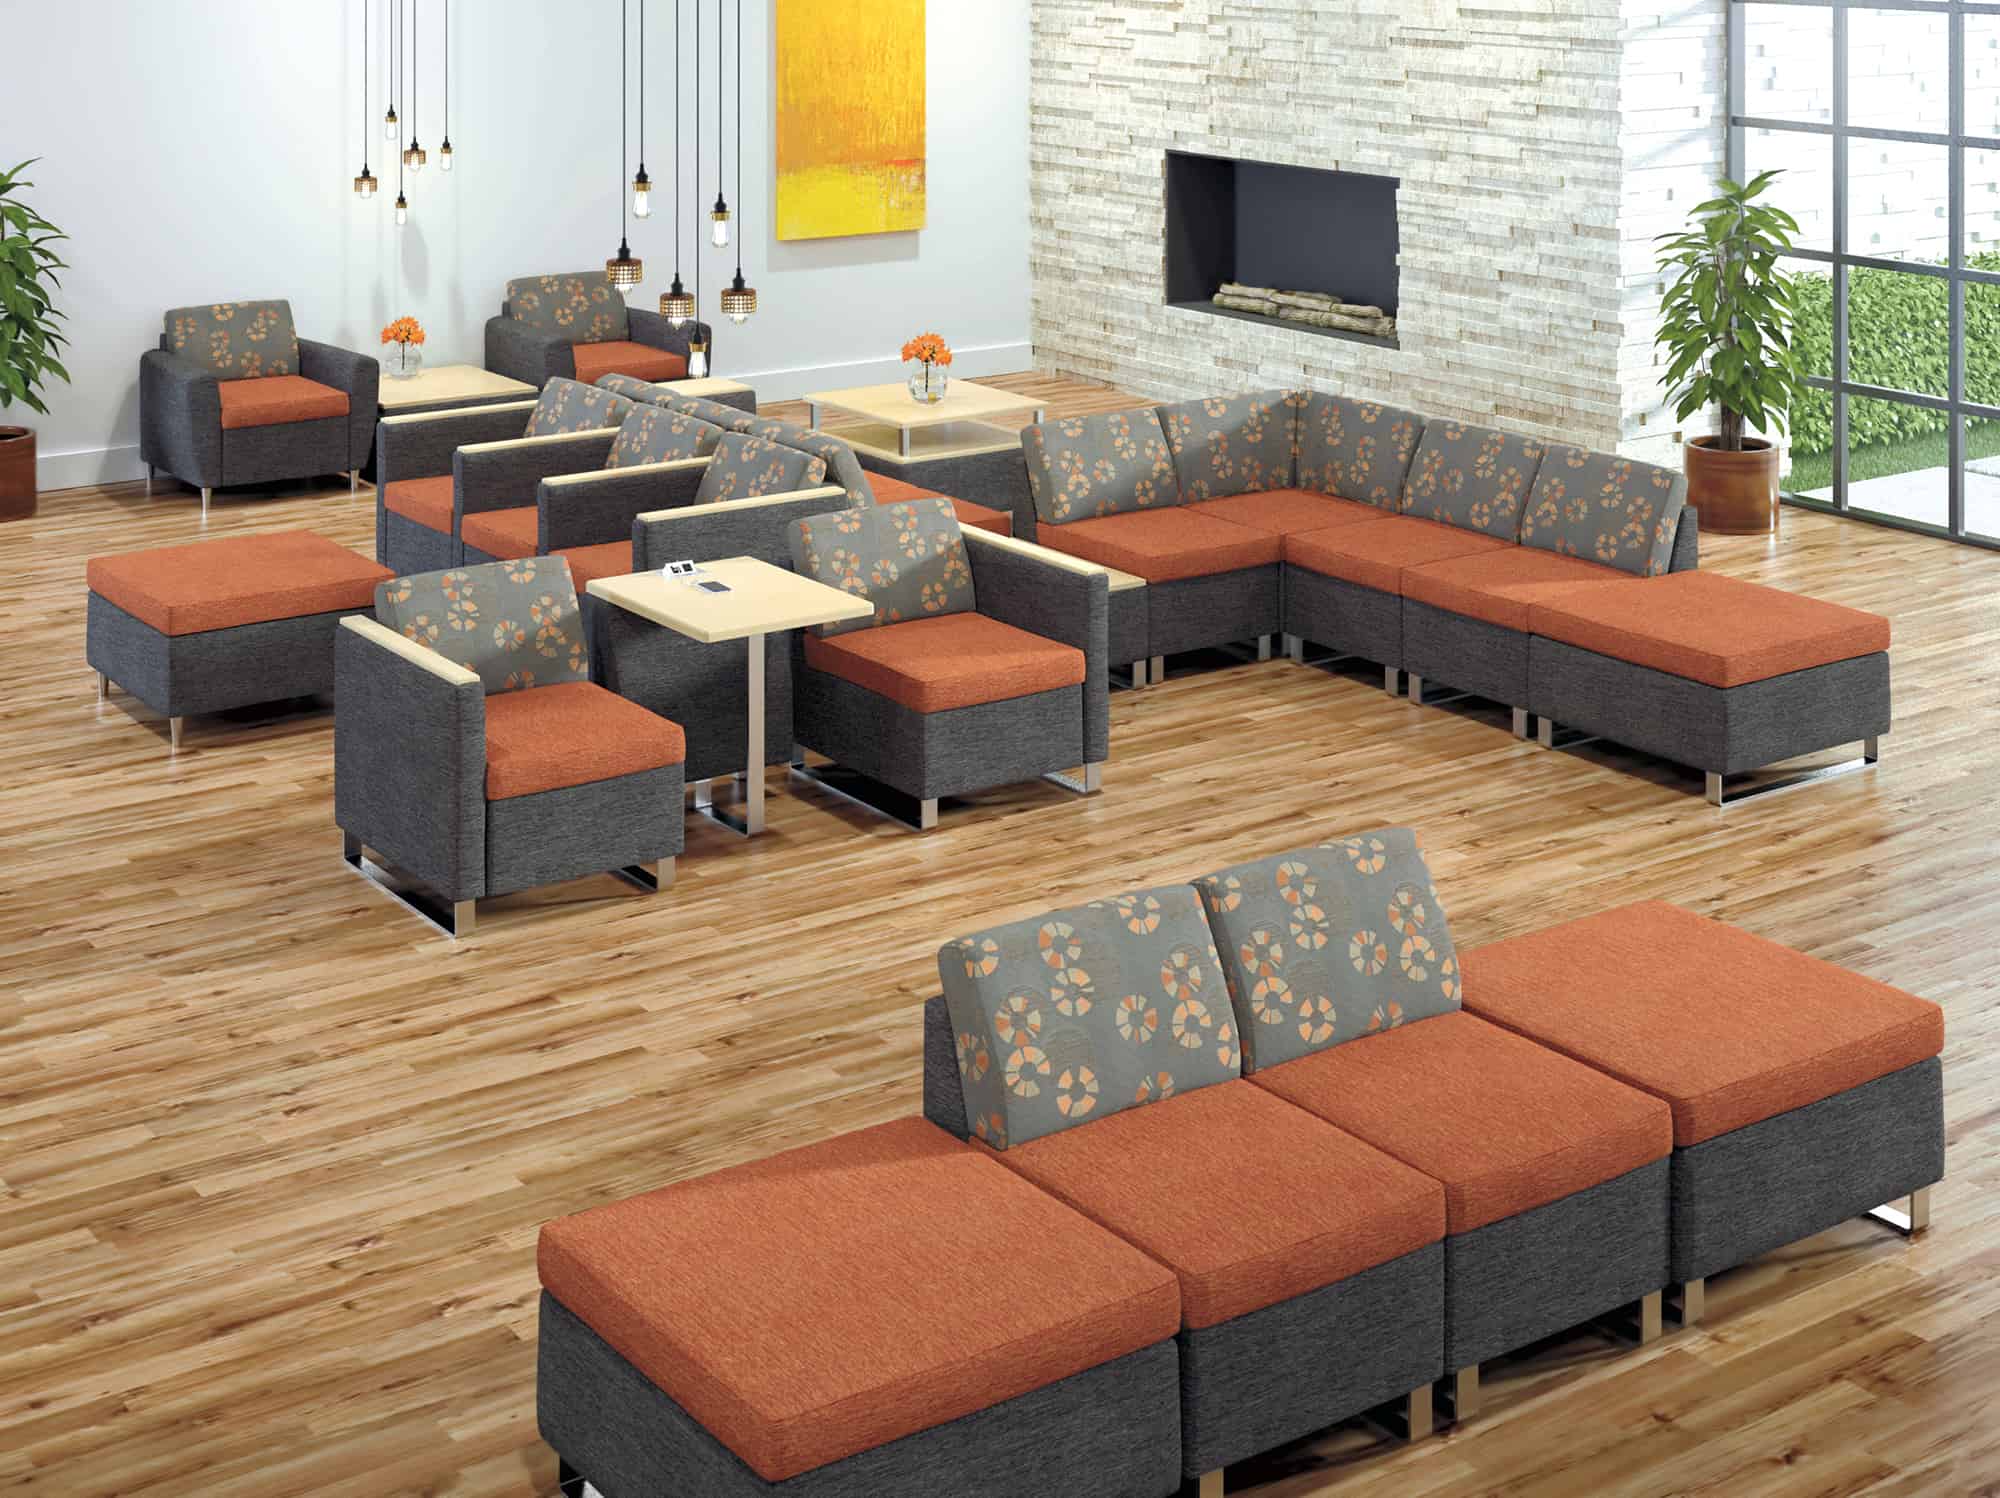 Rally Modular Seating Collection in lobby area